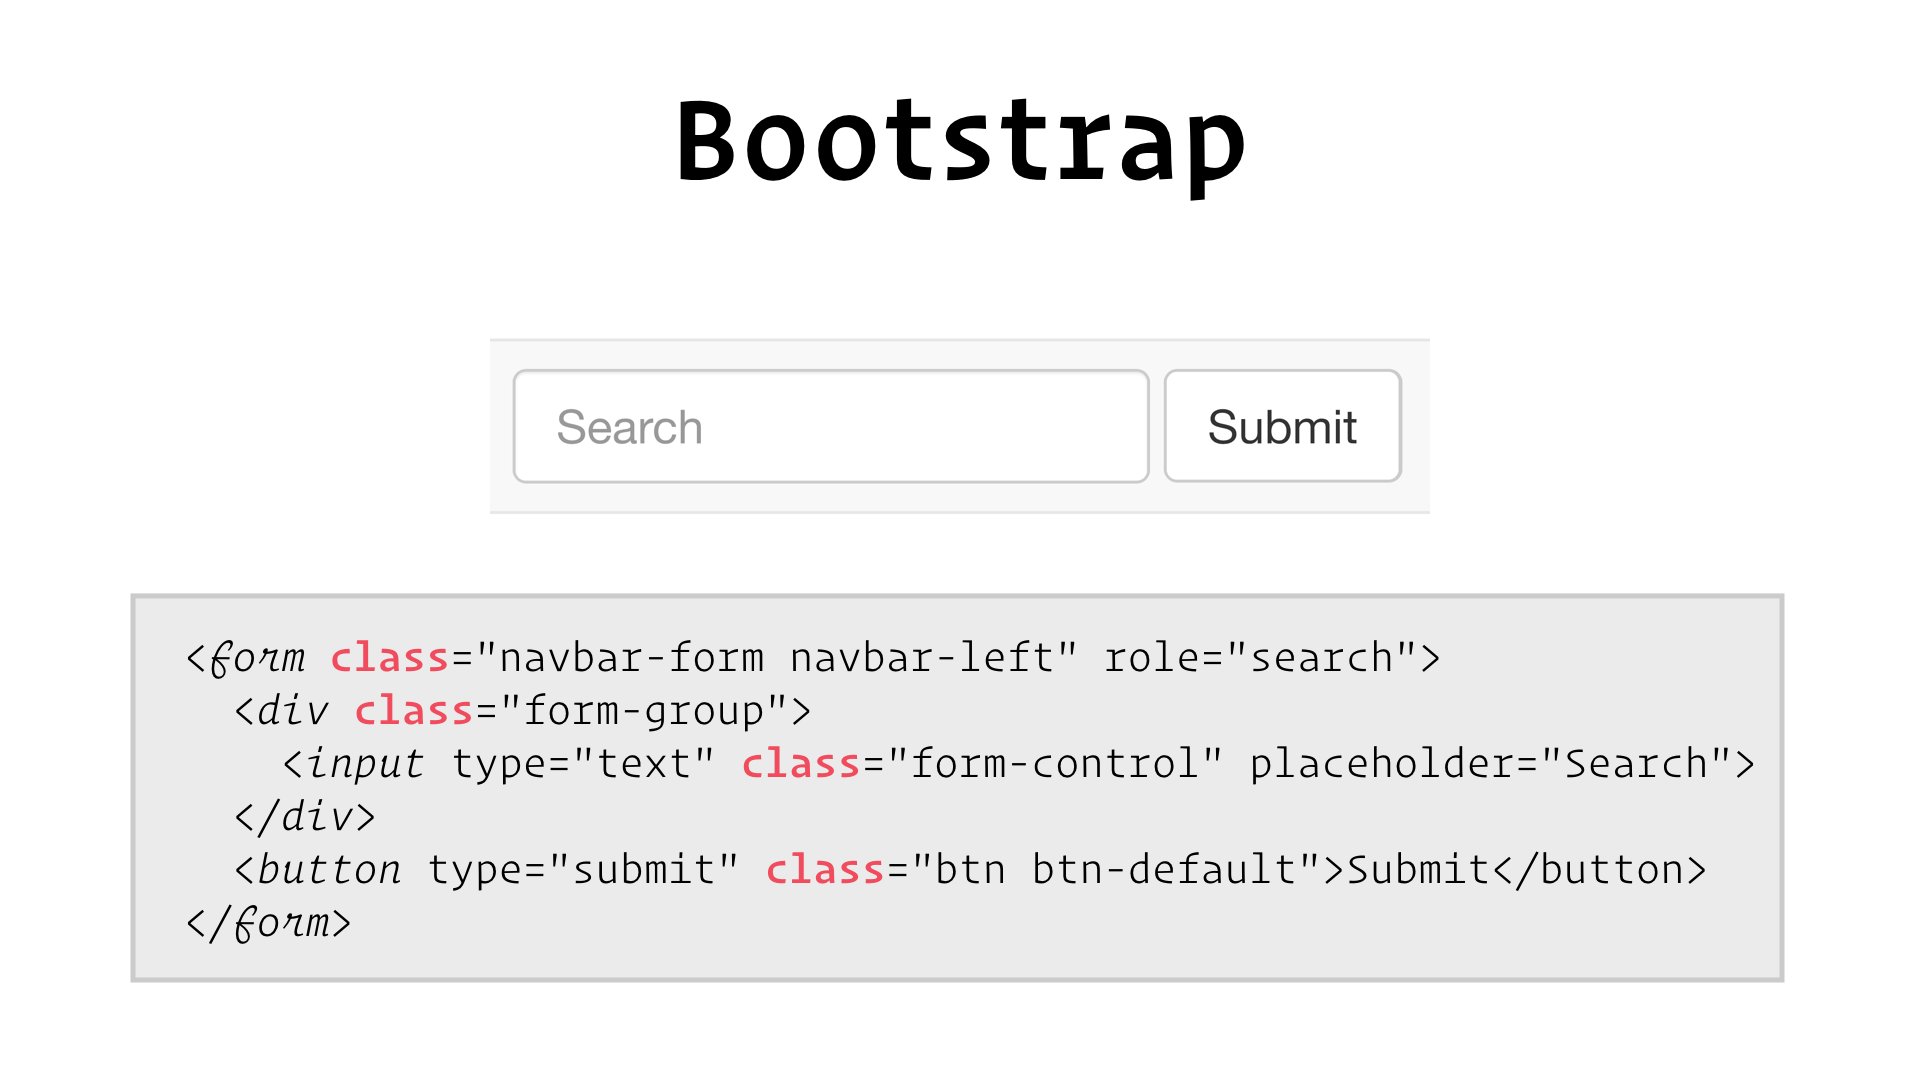 slide: Bootstrap A search form is styled entirely by adding class attributes that apply ready-made styles to HTML elements